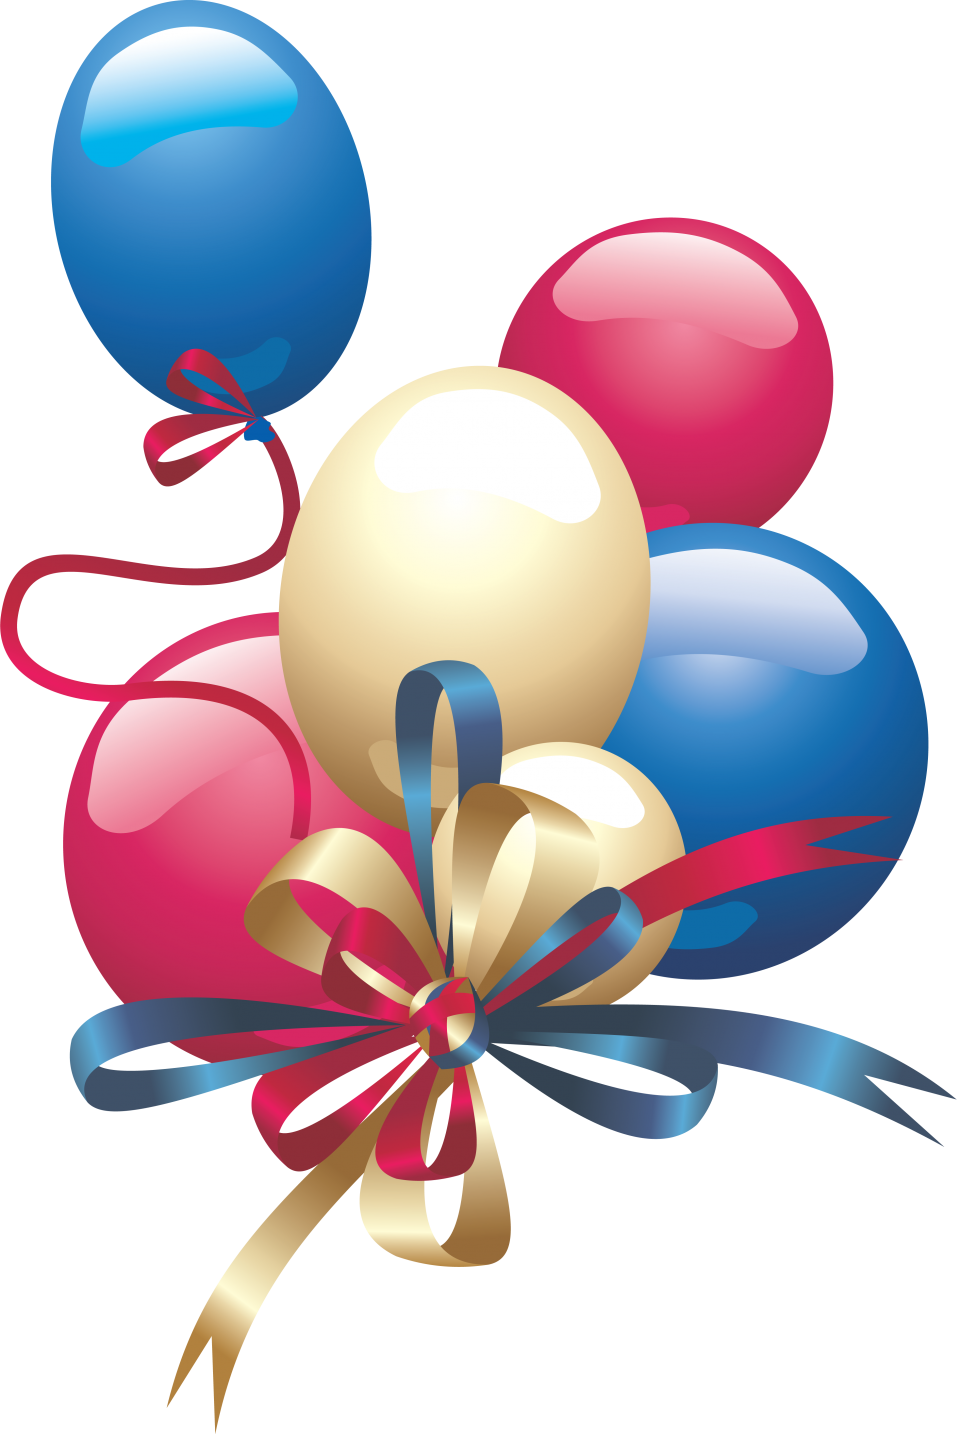 Birthday Balloons PNG Background Image